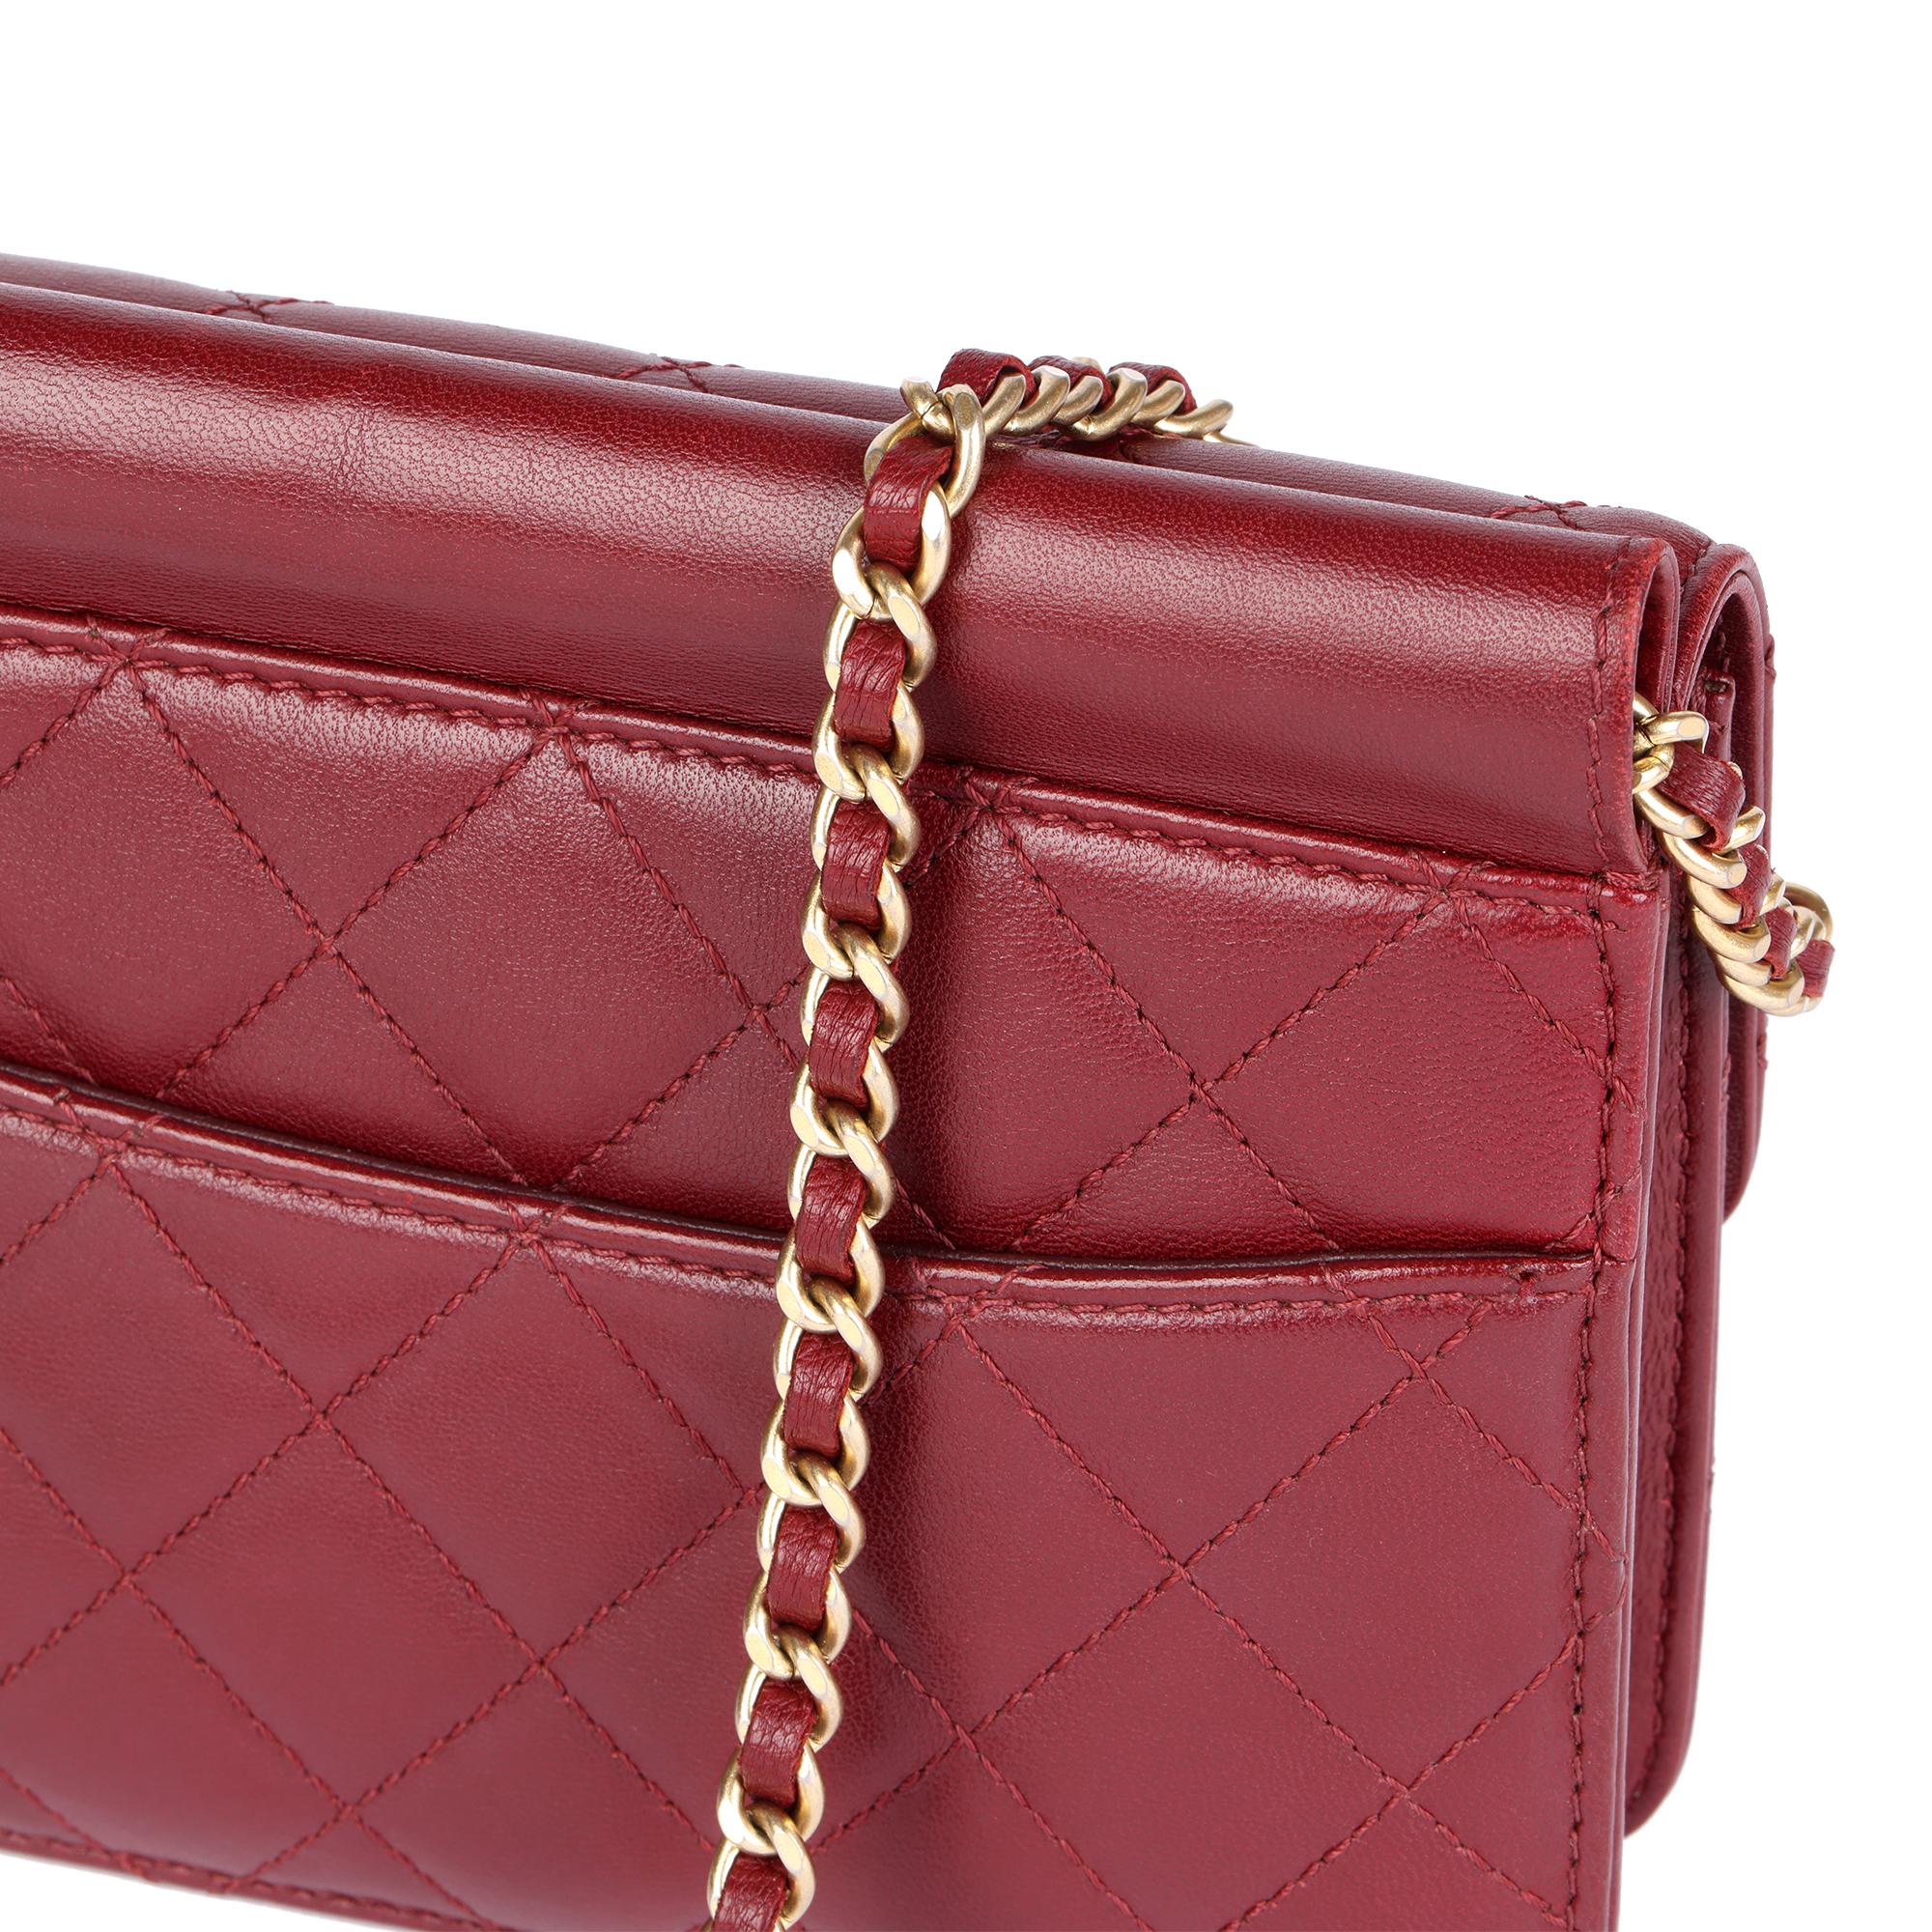 CHANEL Burgundy Quilted Lambskin Mini Flap Bag For Sale 1